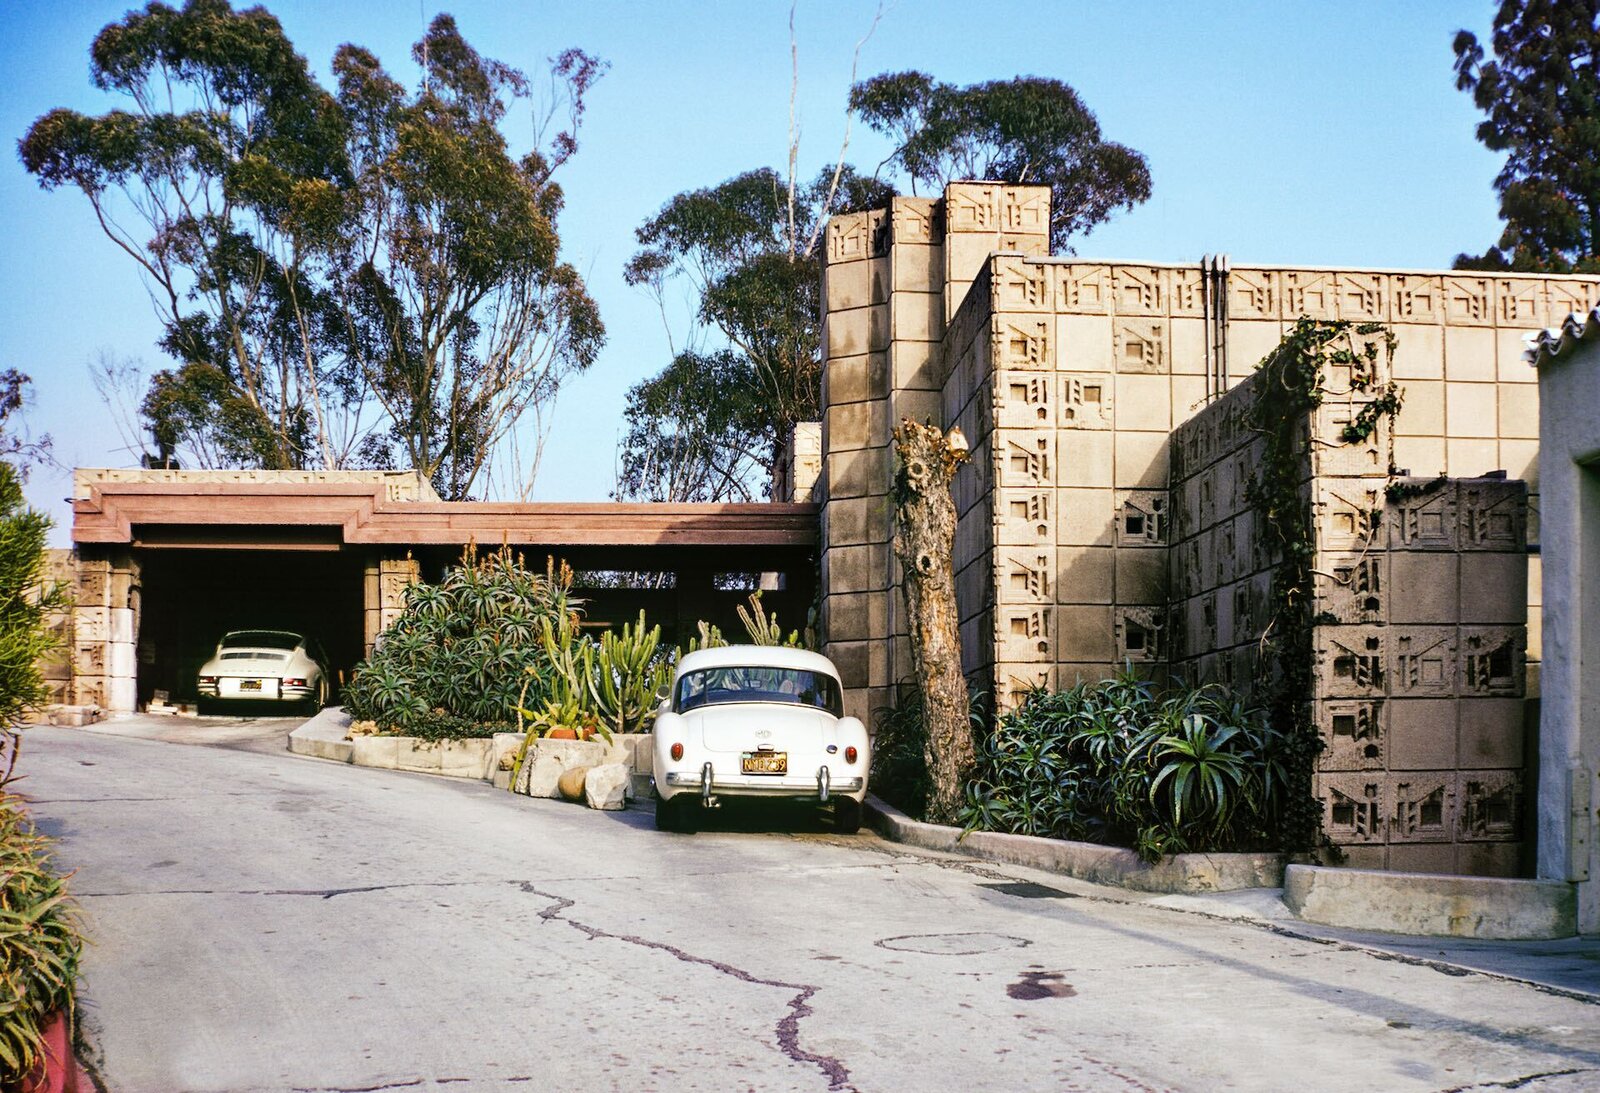 An Iconic Frank Lloyd Wright Home in Los Angeles